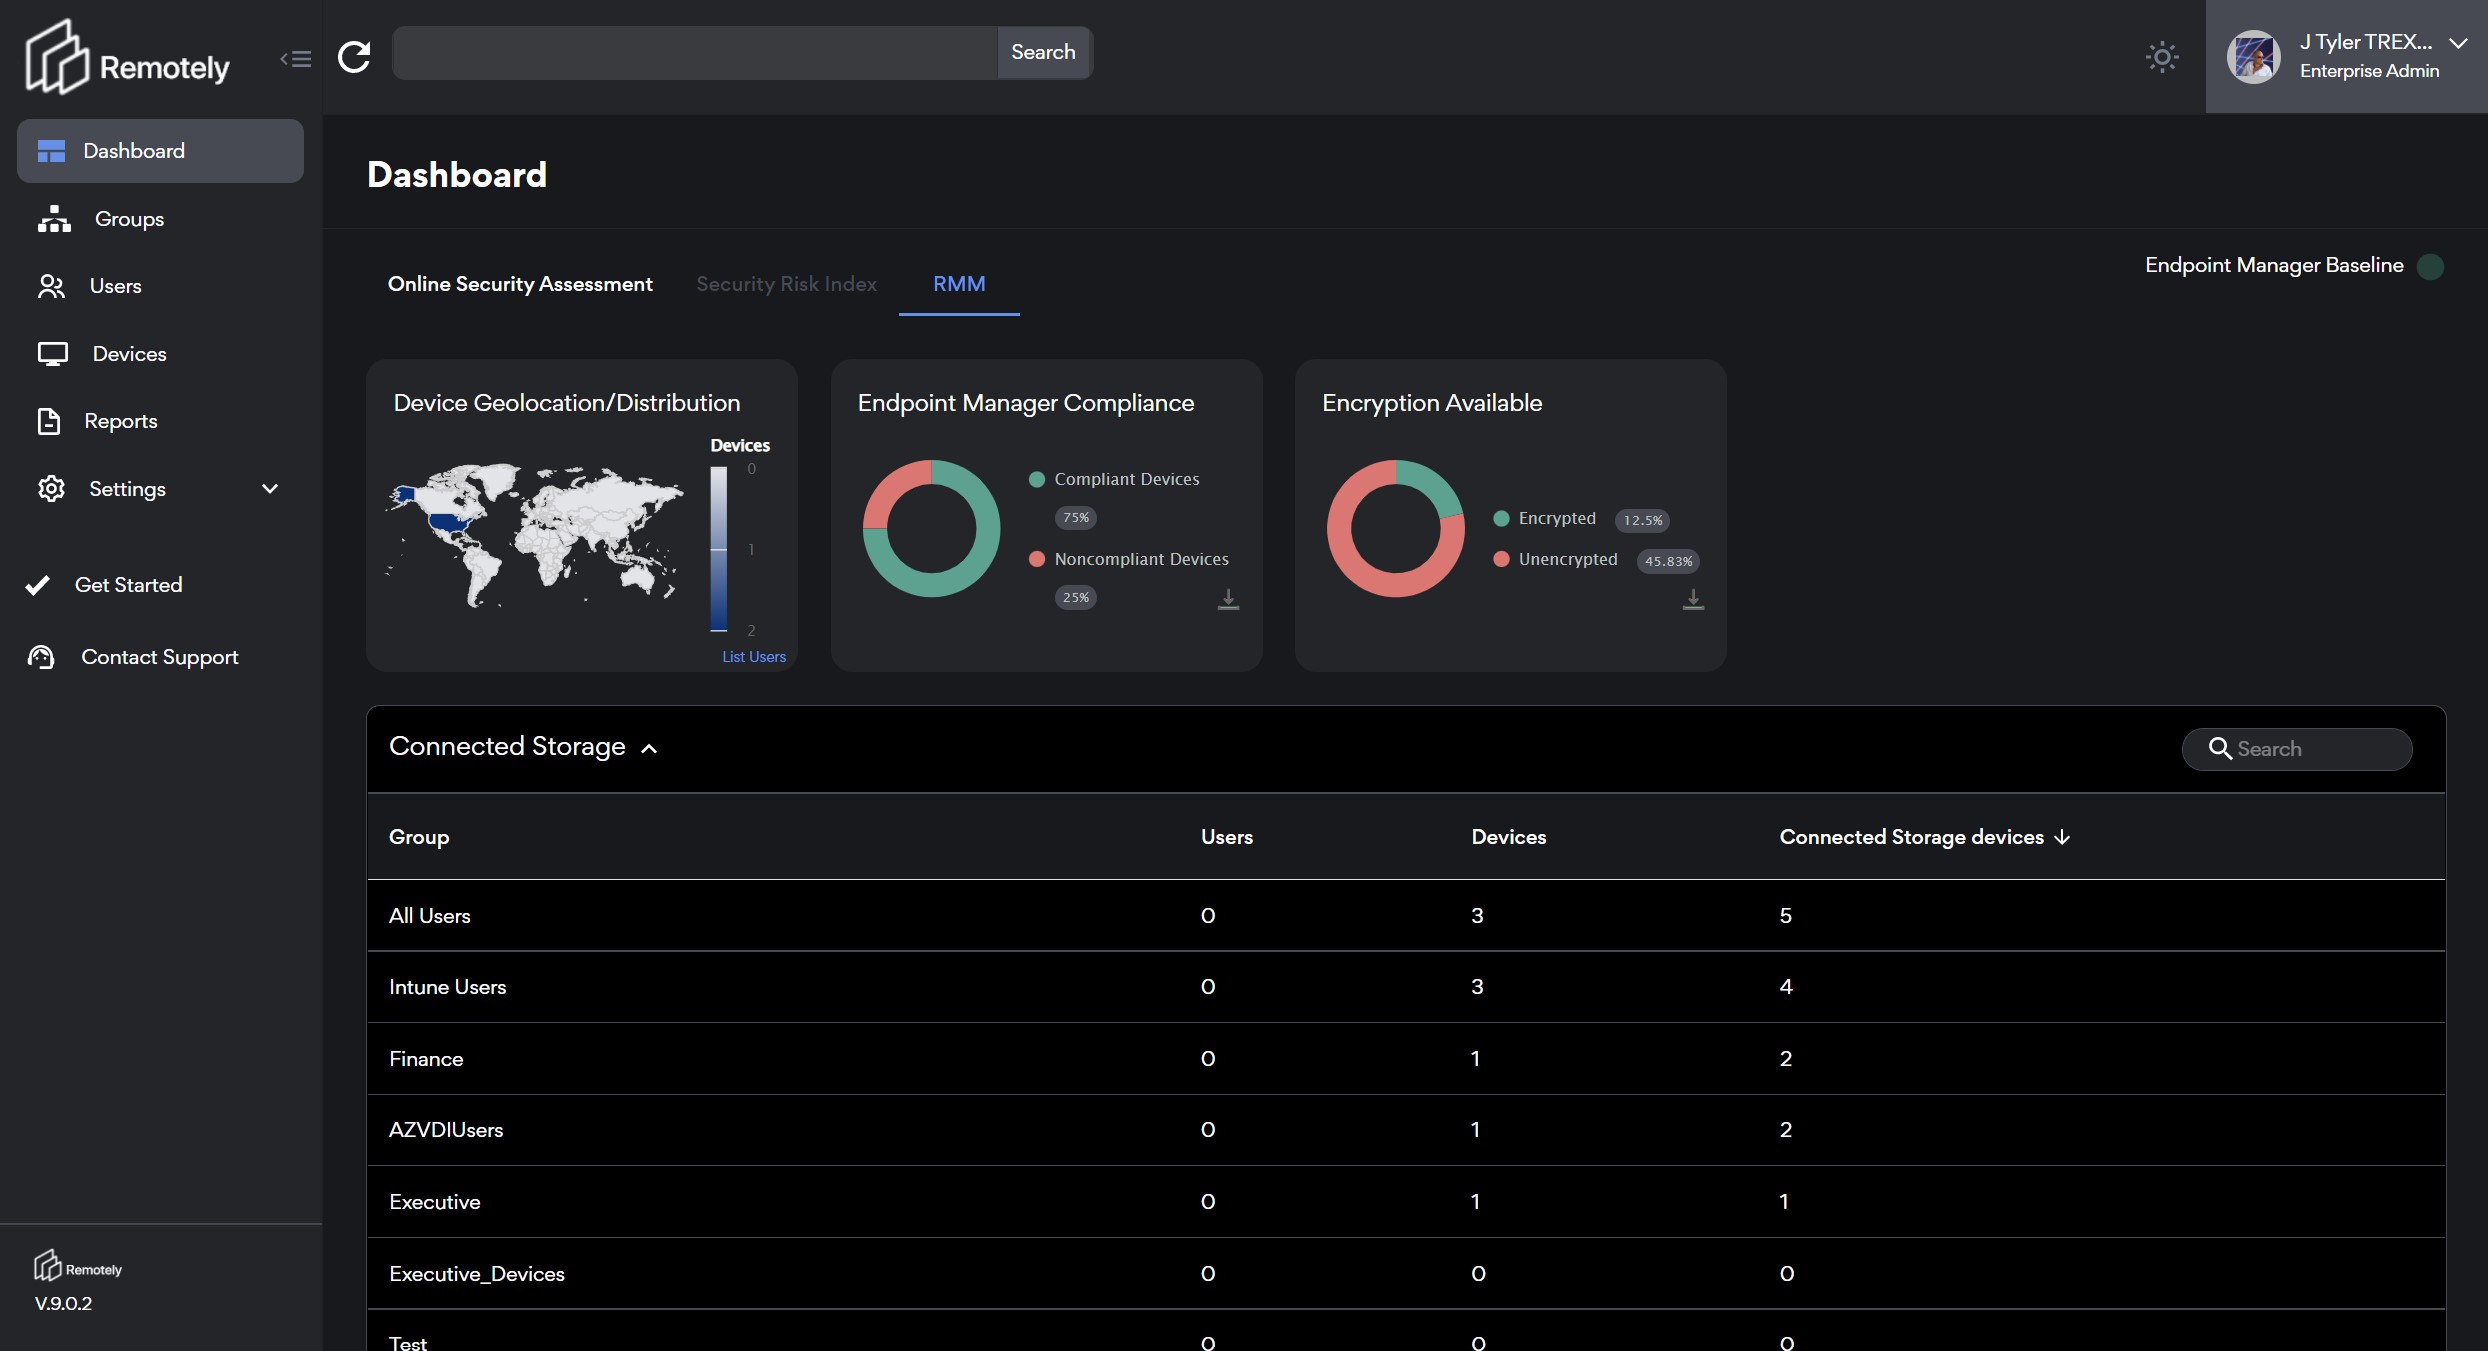 Remotely Endpoint Dashboard